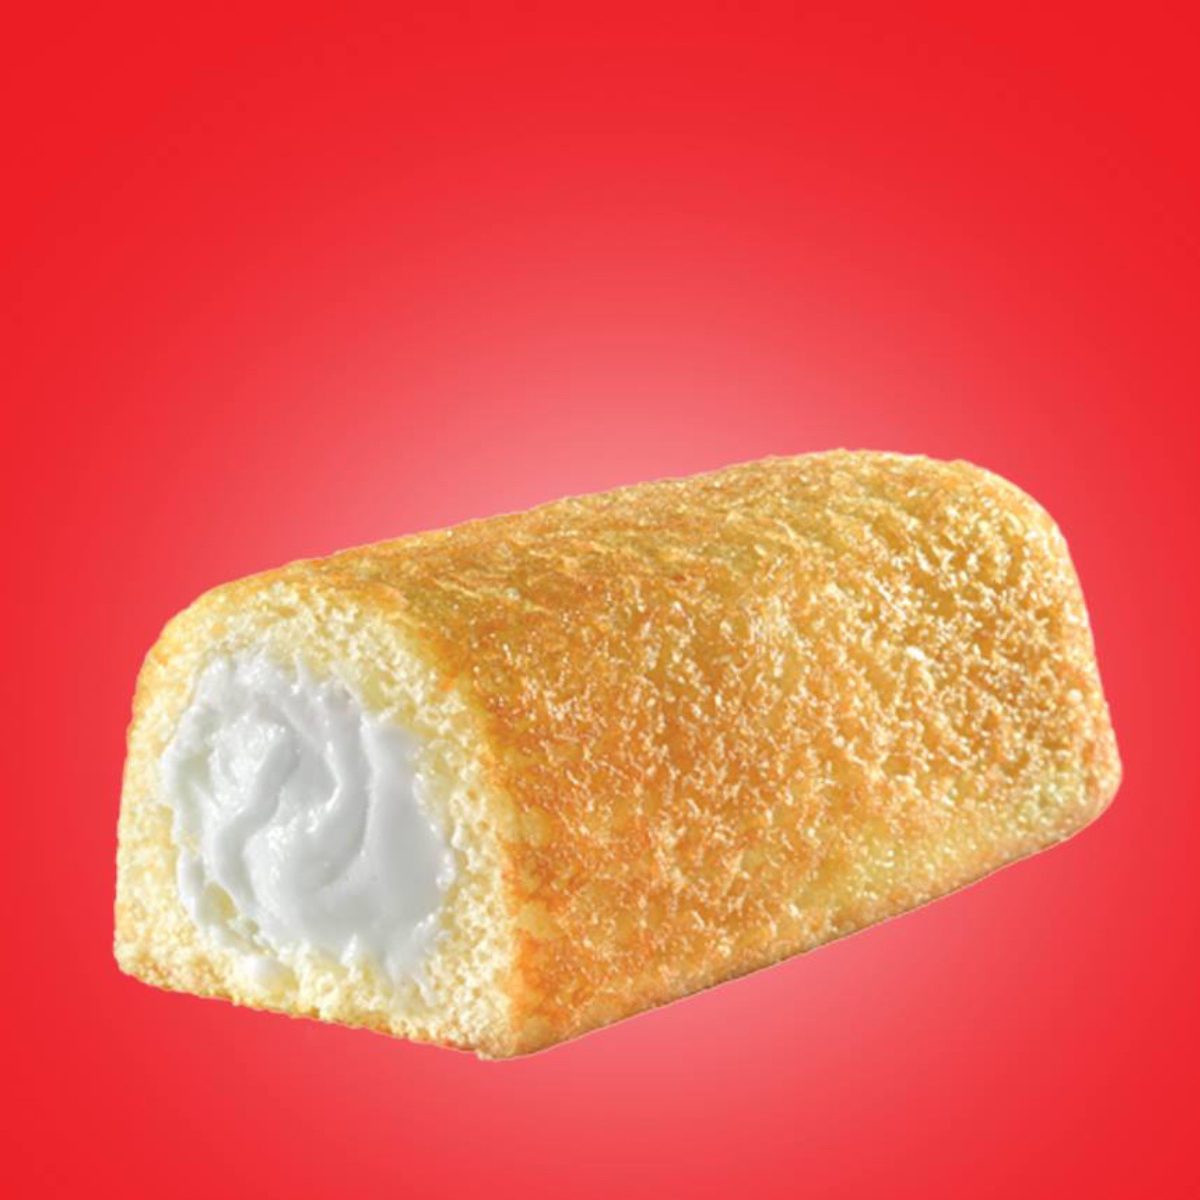 <p><strong><a class="SWhtmlLink" href="http://hostesscakes.com/products%20" rel="noopener">Twinkies</a>, Schiller Park</strong></p> <p>Everyone's favorite cream-filled treat was originally filled with bananas! The company only switched to the now-popular vanilla cream because banana imports slowed to a halt during World War II.</p>